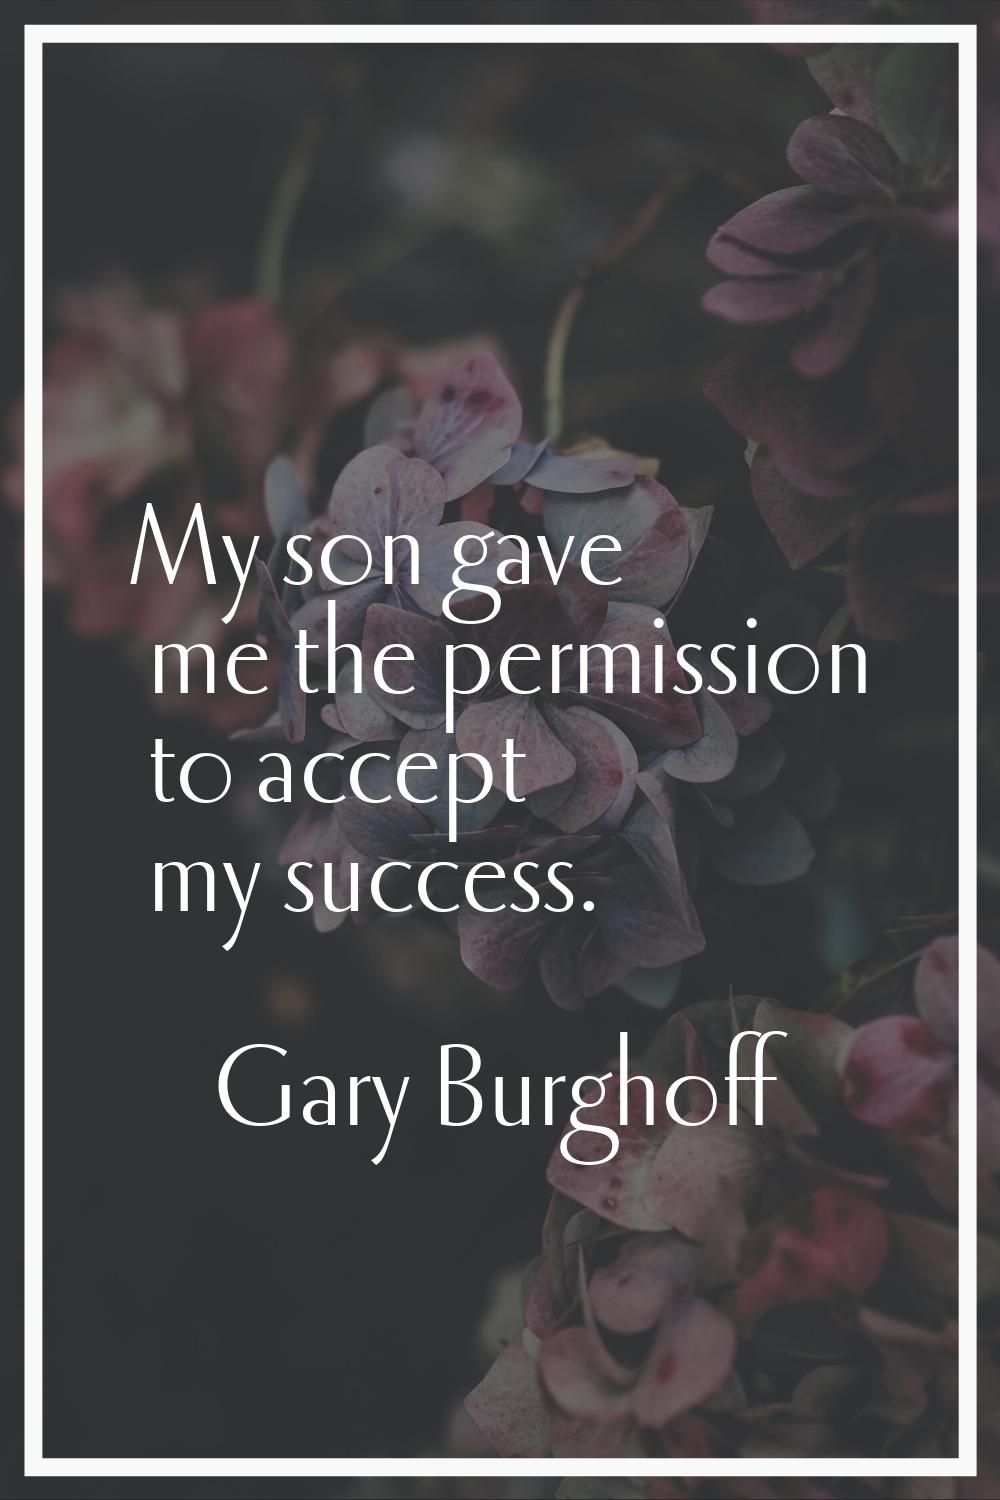 My son gave me the permission to accept my success.